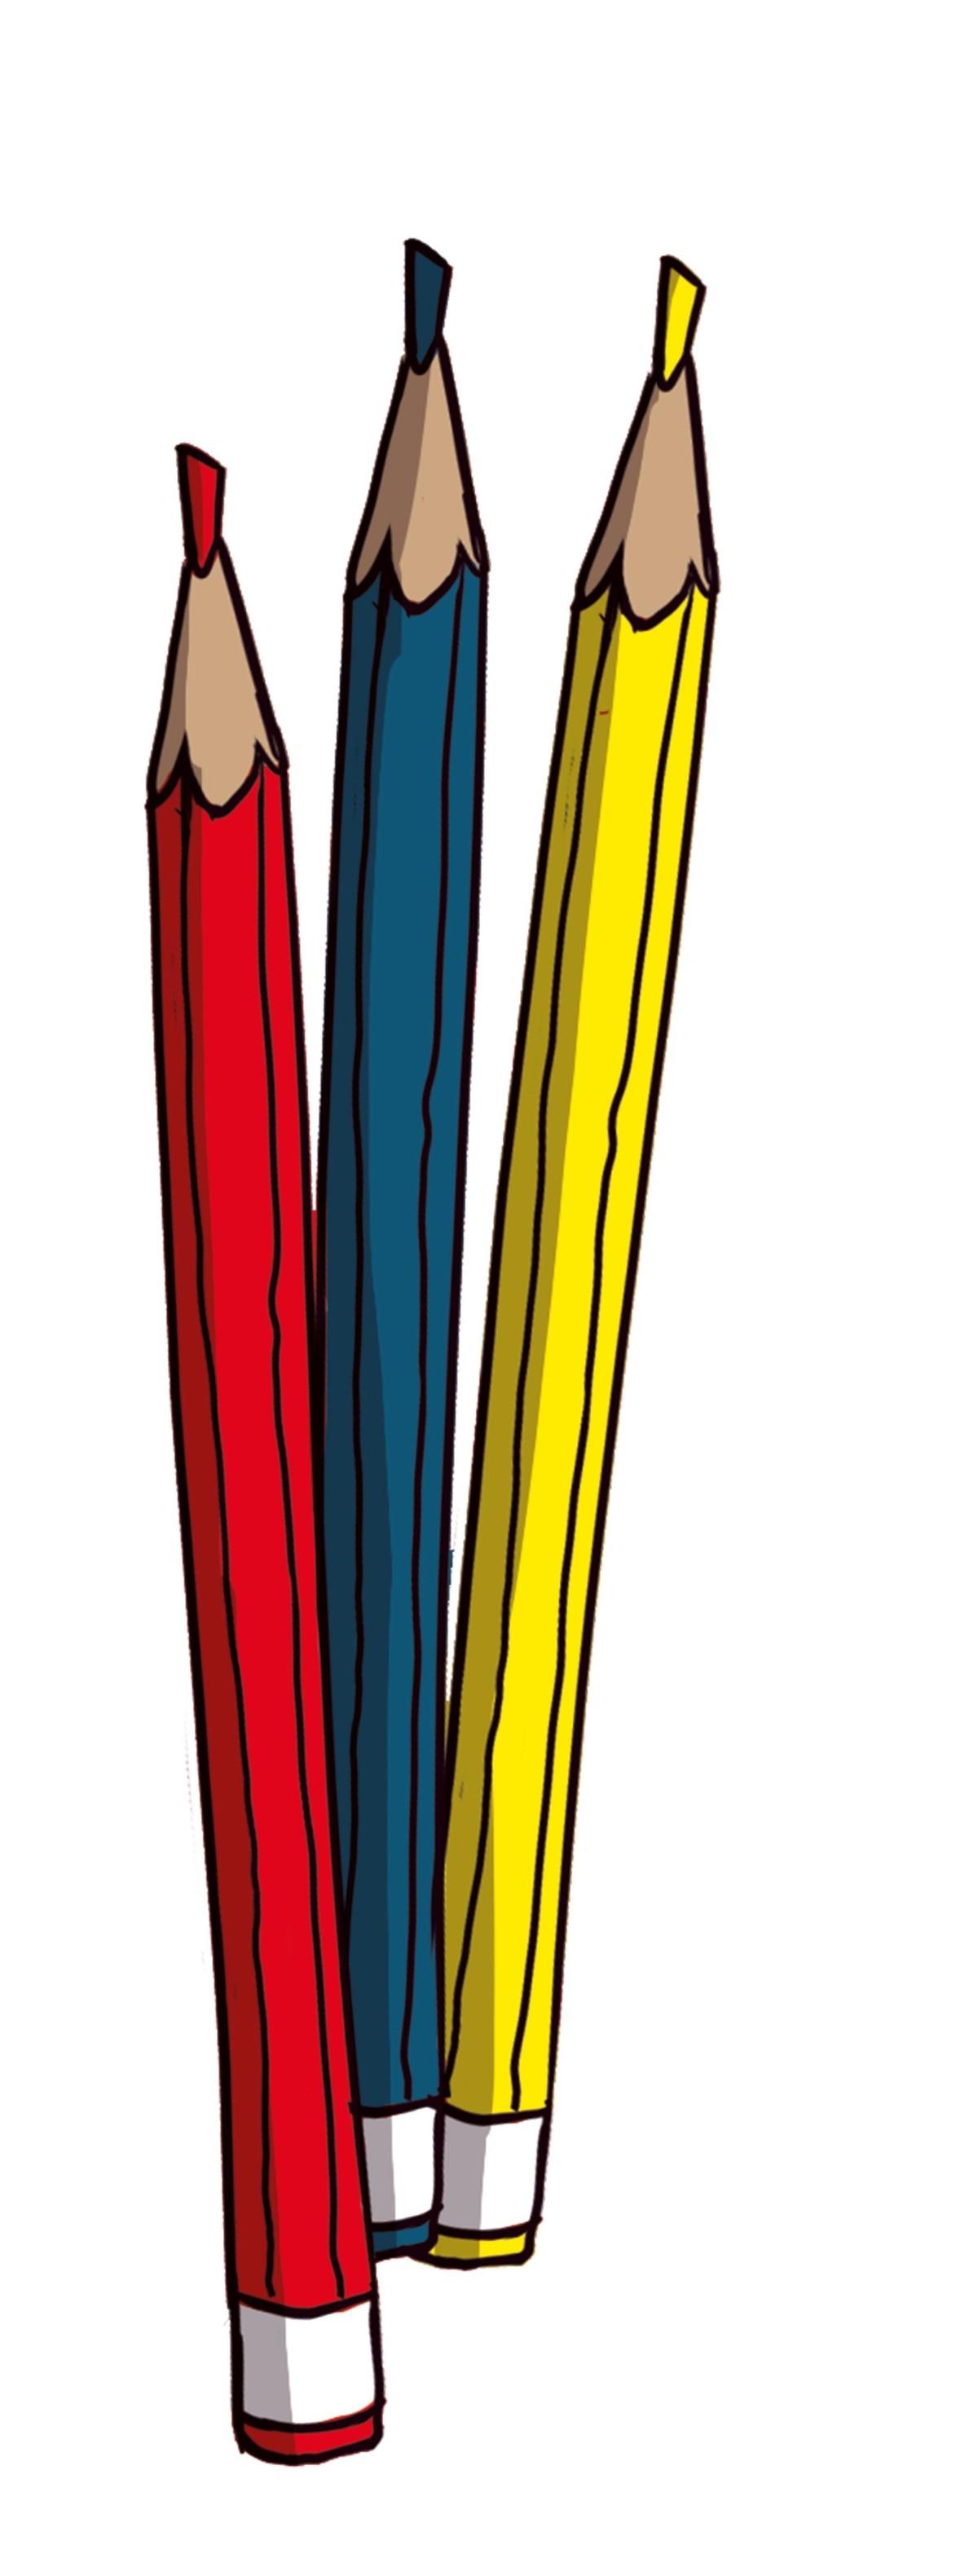 Three colouring pencils, a red one, a blue one and a yellow one